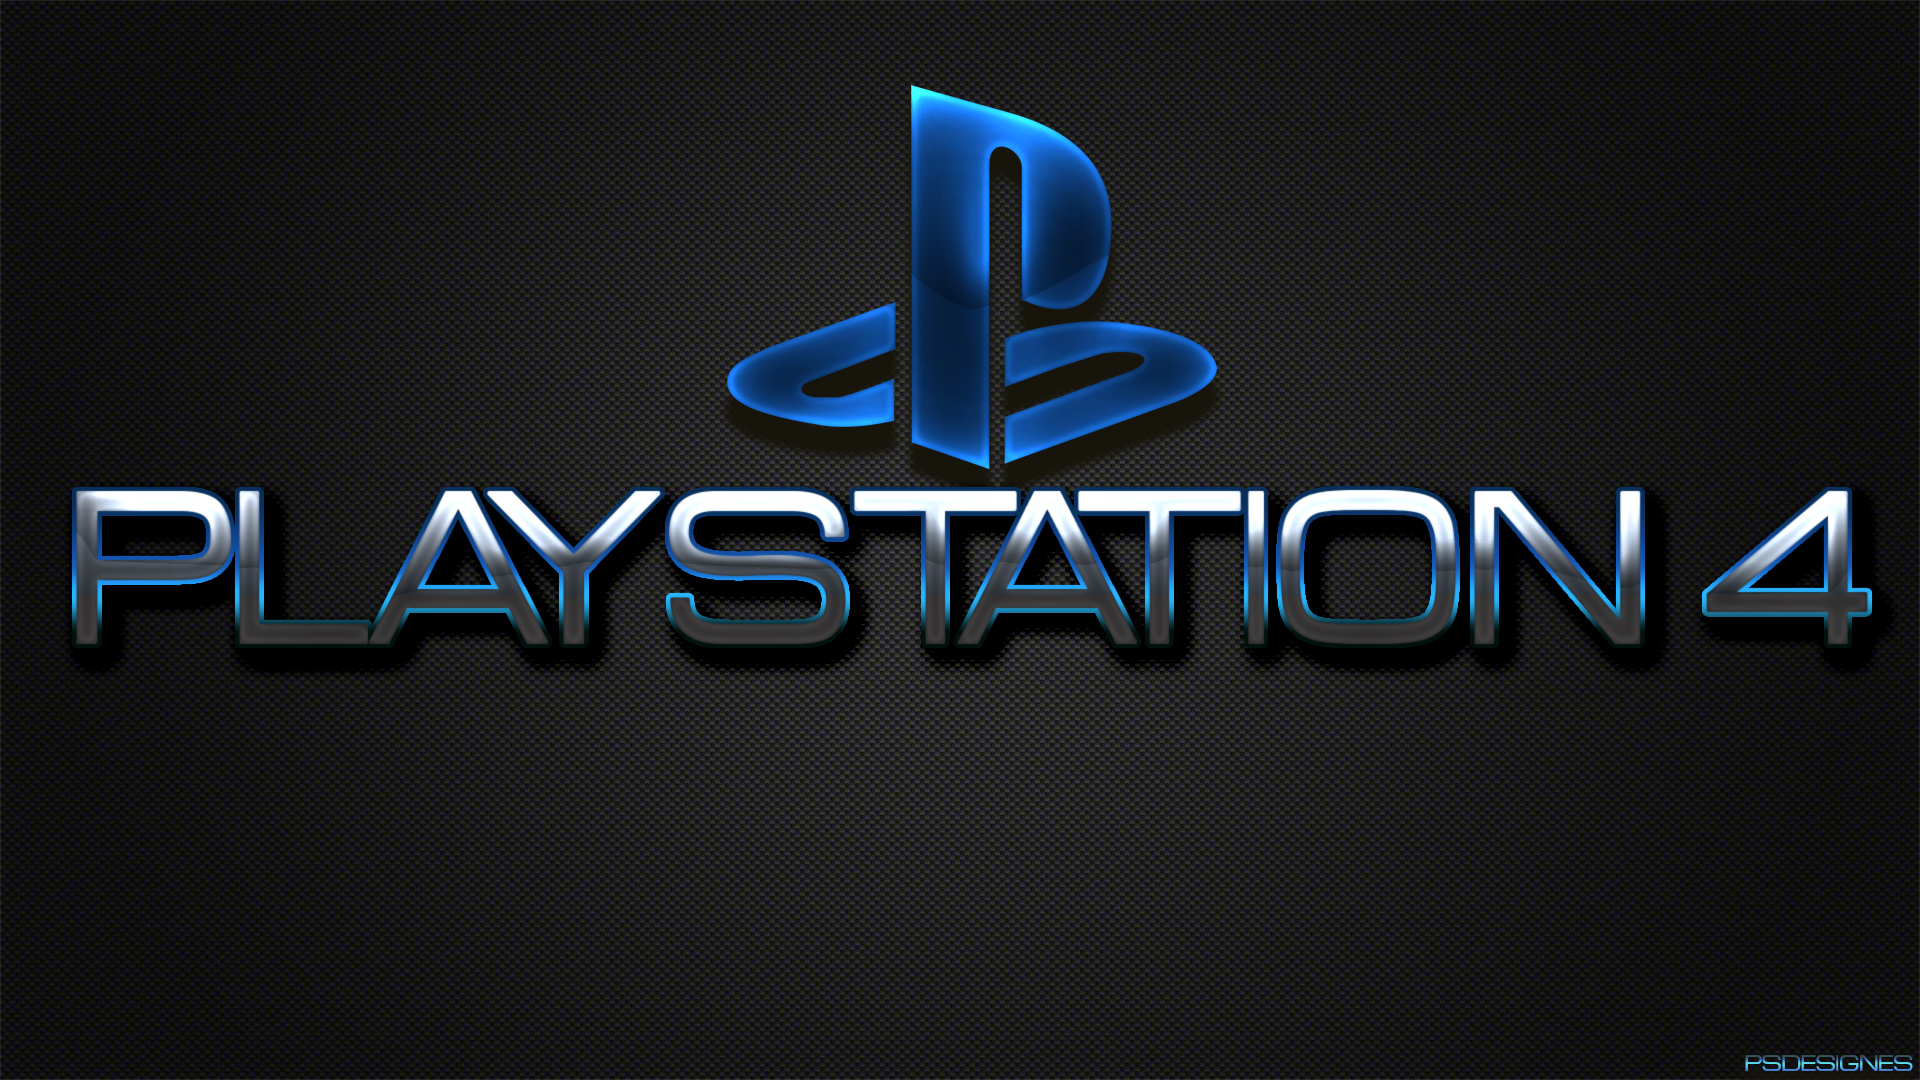 Playstation 4 wallpaper by PSdesignes on